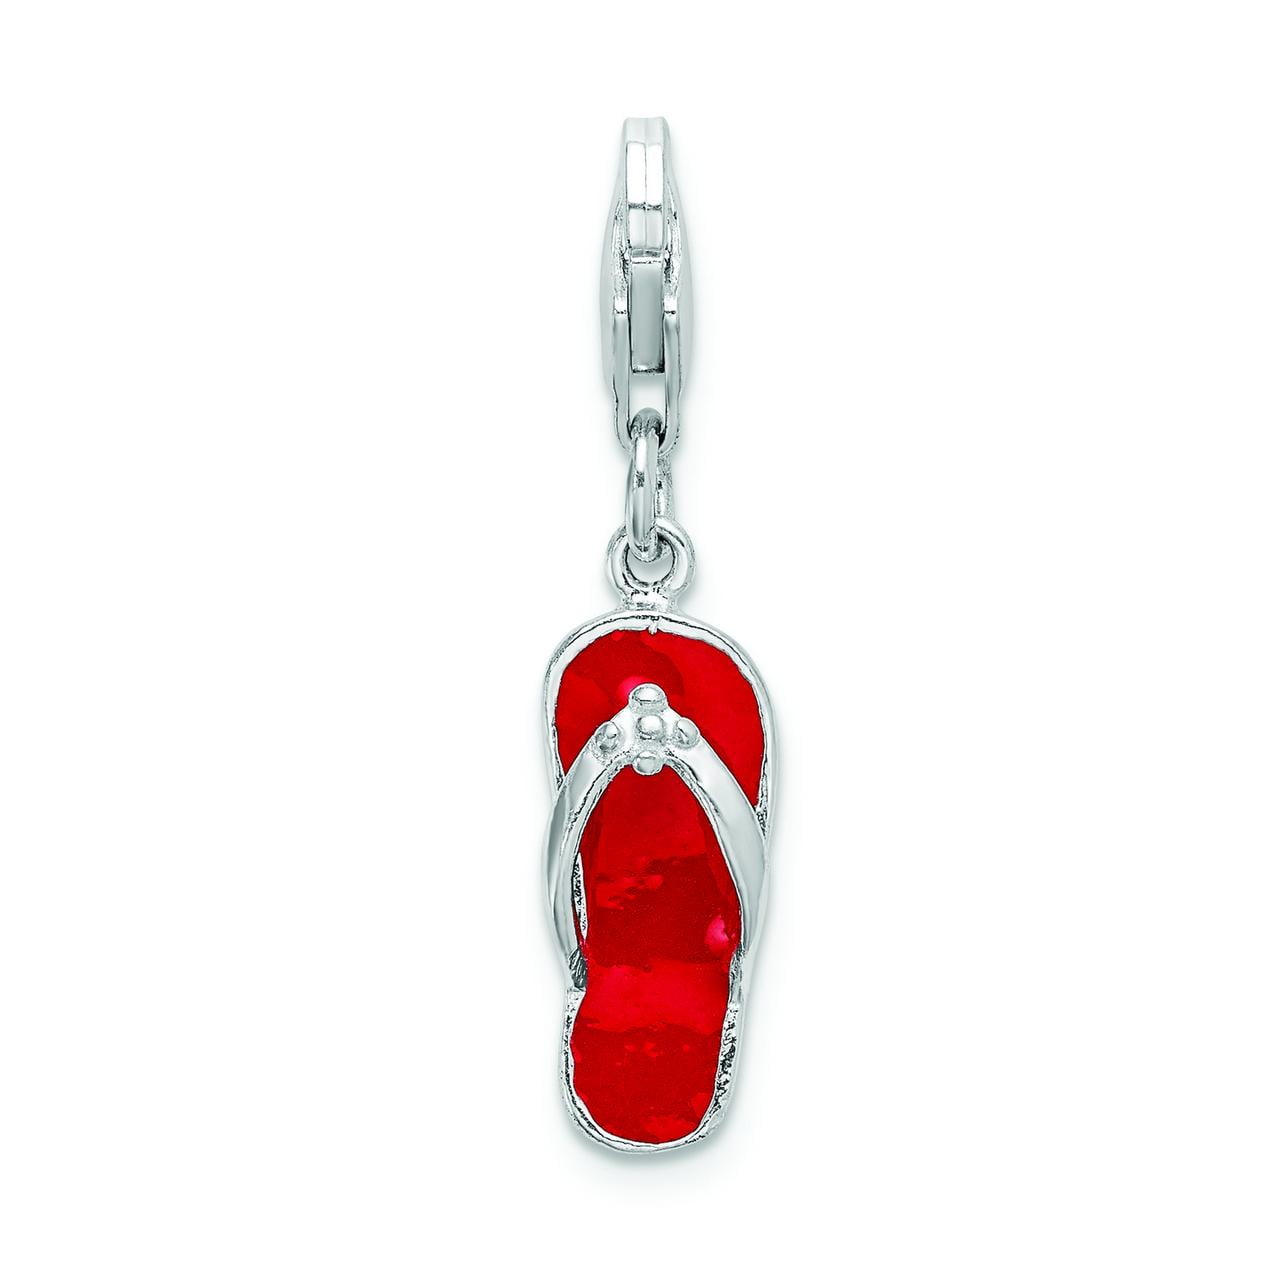 Jewelry Stores Network Enameled Santa Charm in 925 Sterling Silver 35x15mm